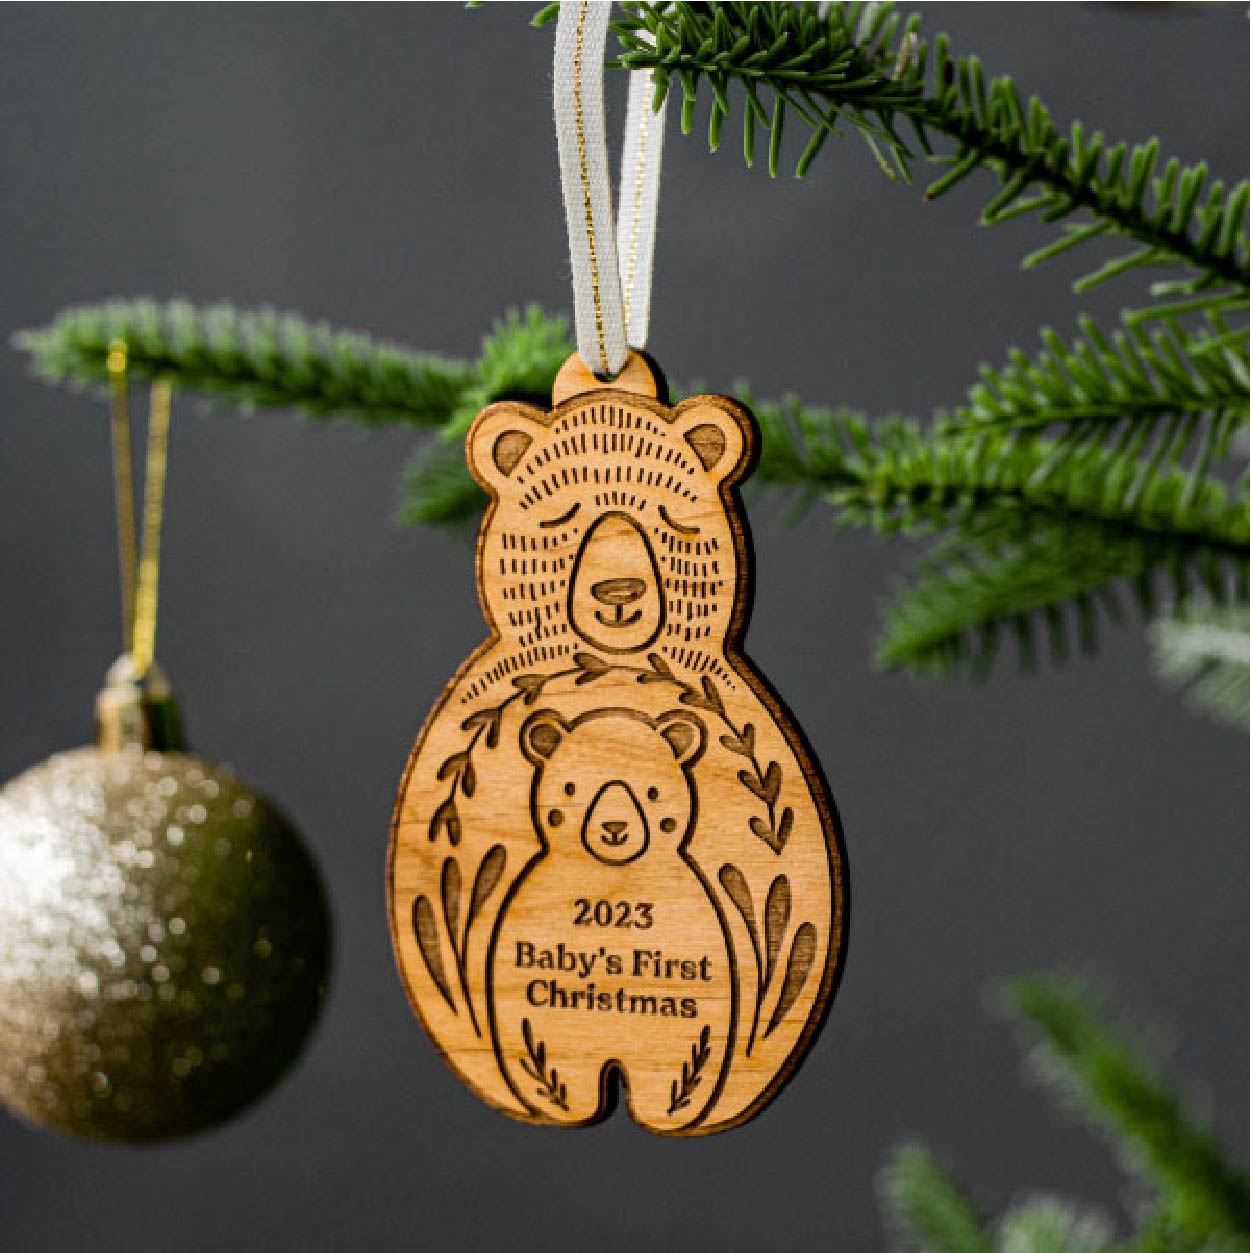 Baby's First Christmas Ornament - Bear and Cub